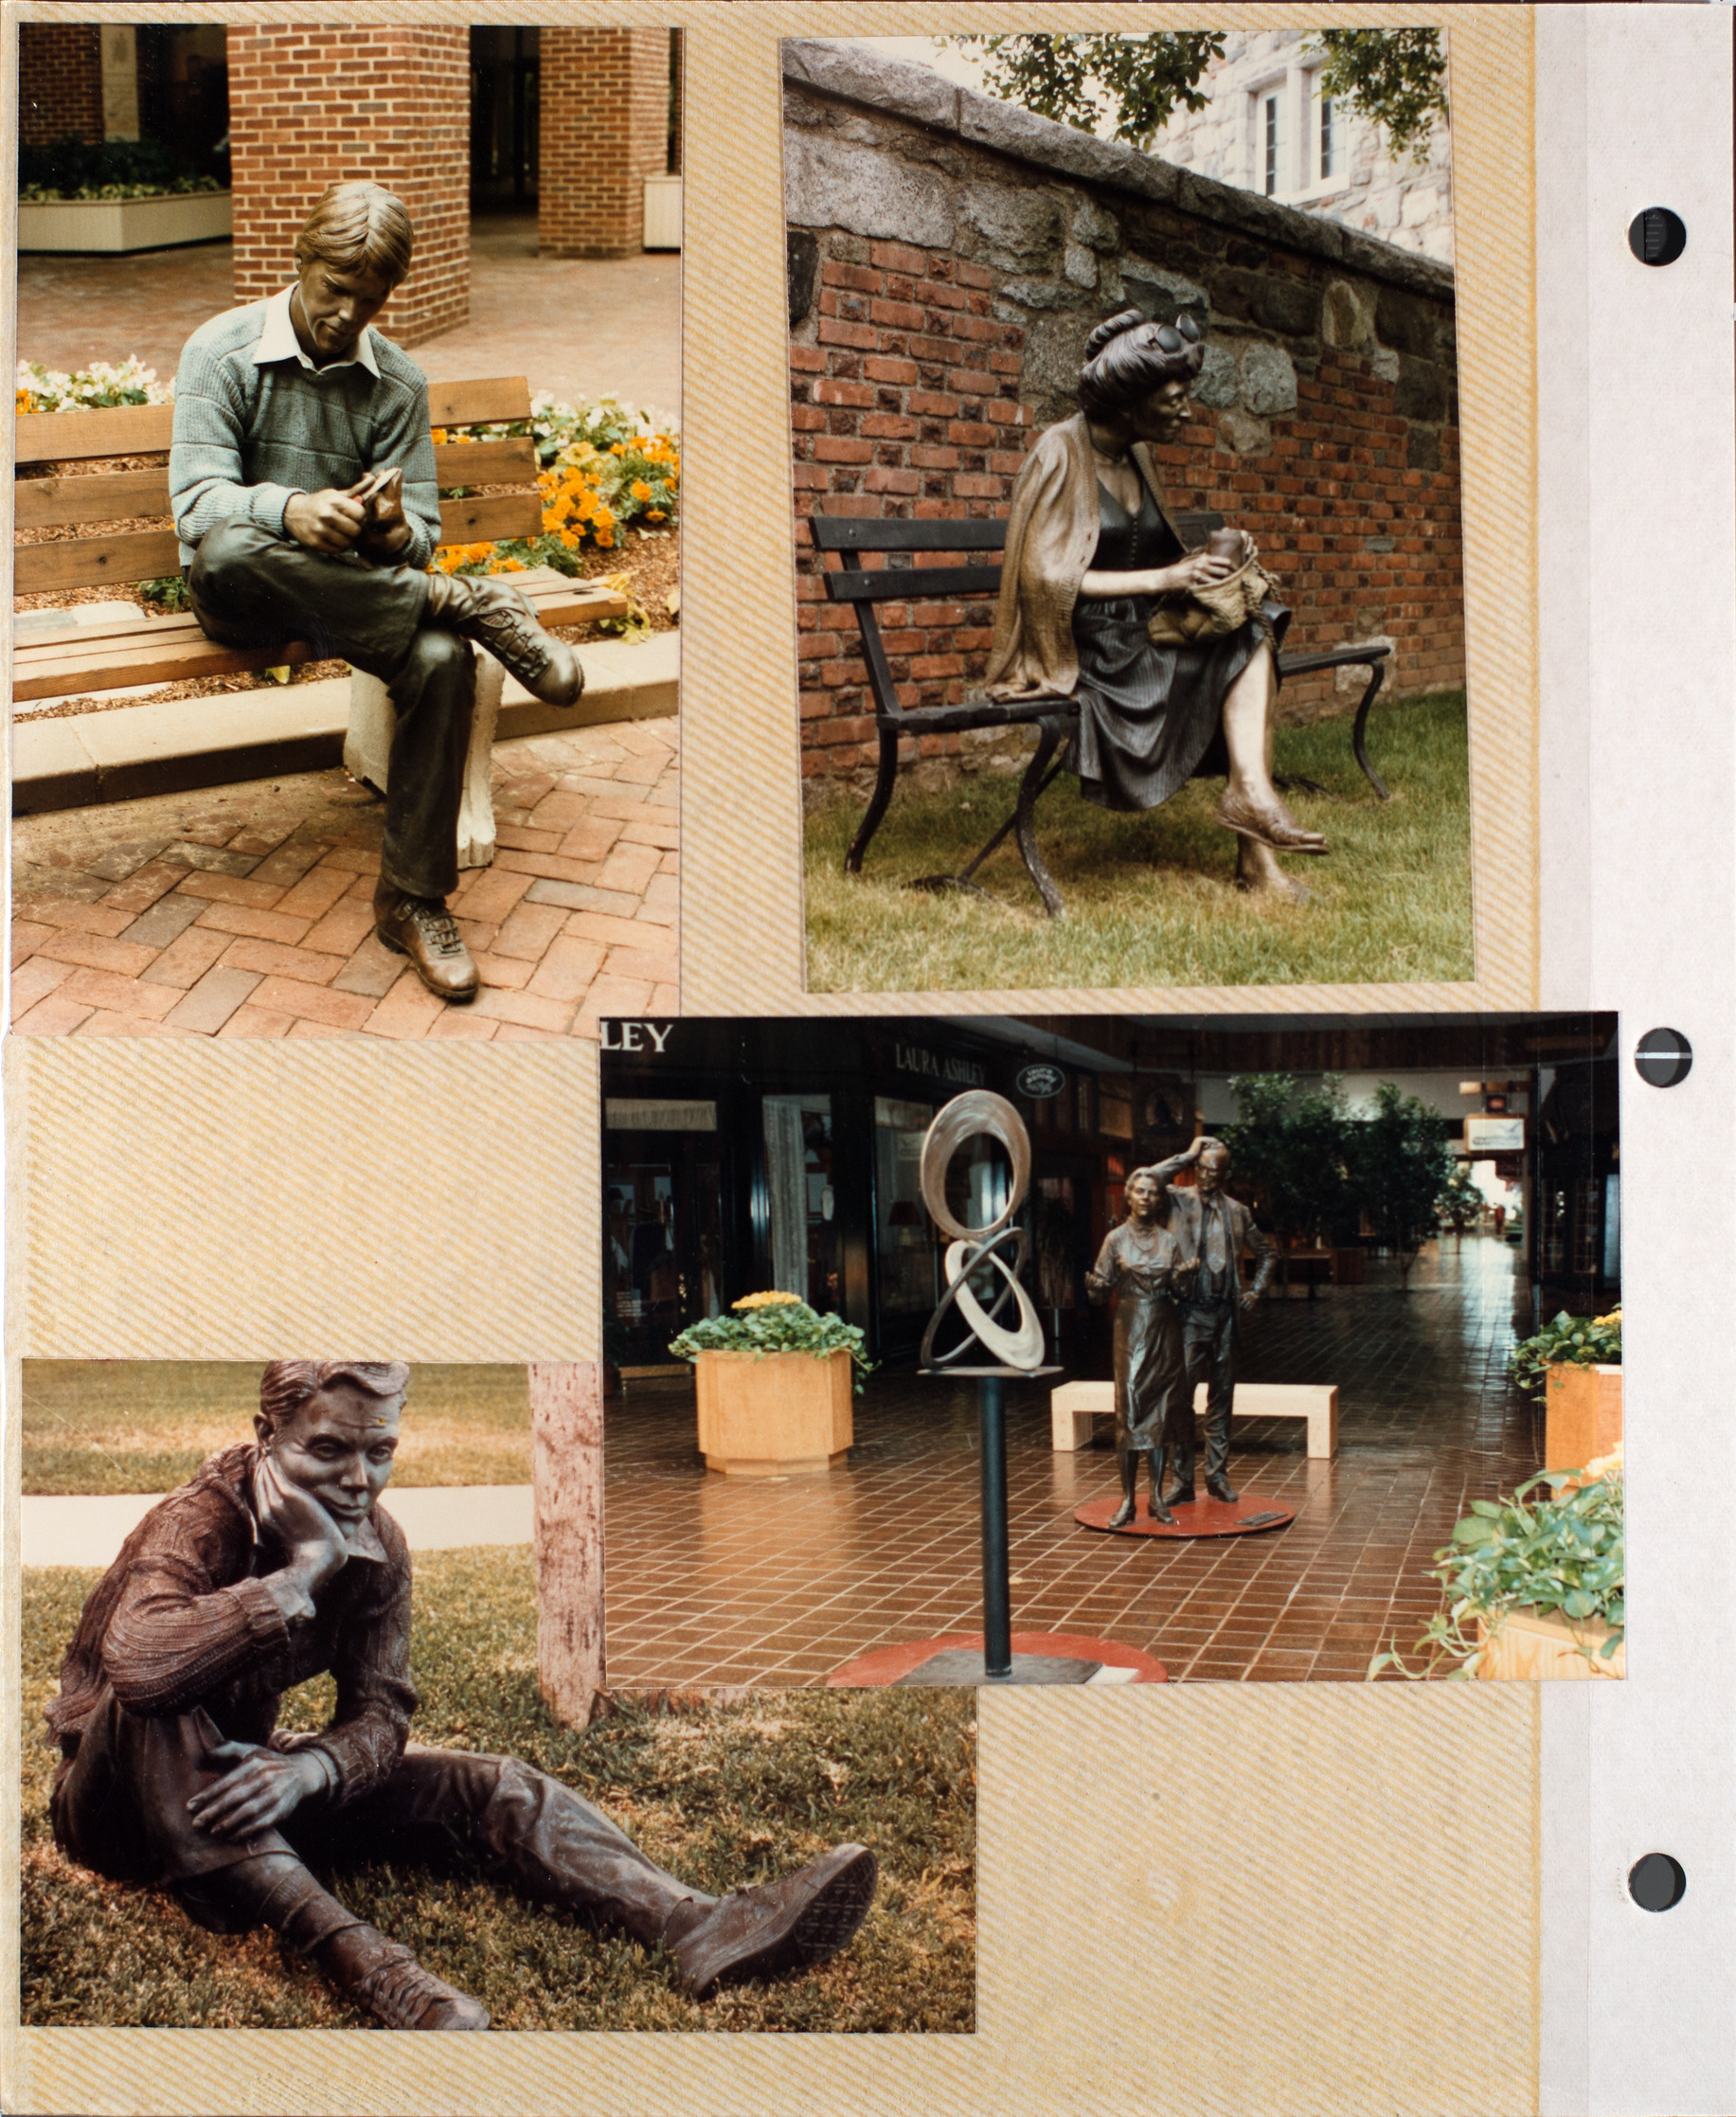 Photographs of sculptures in Green Valley